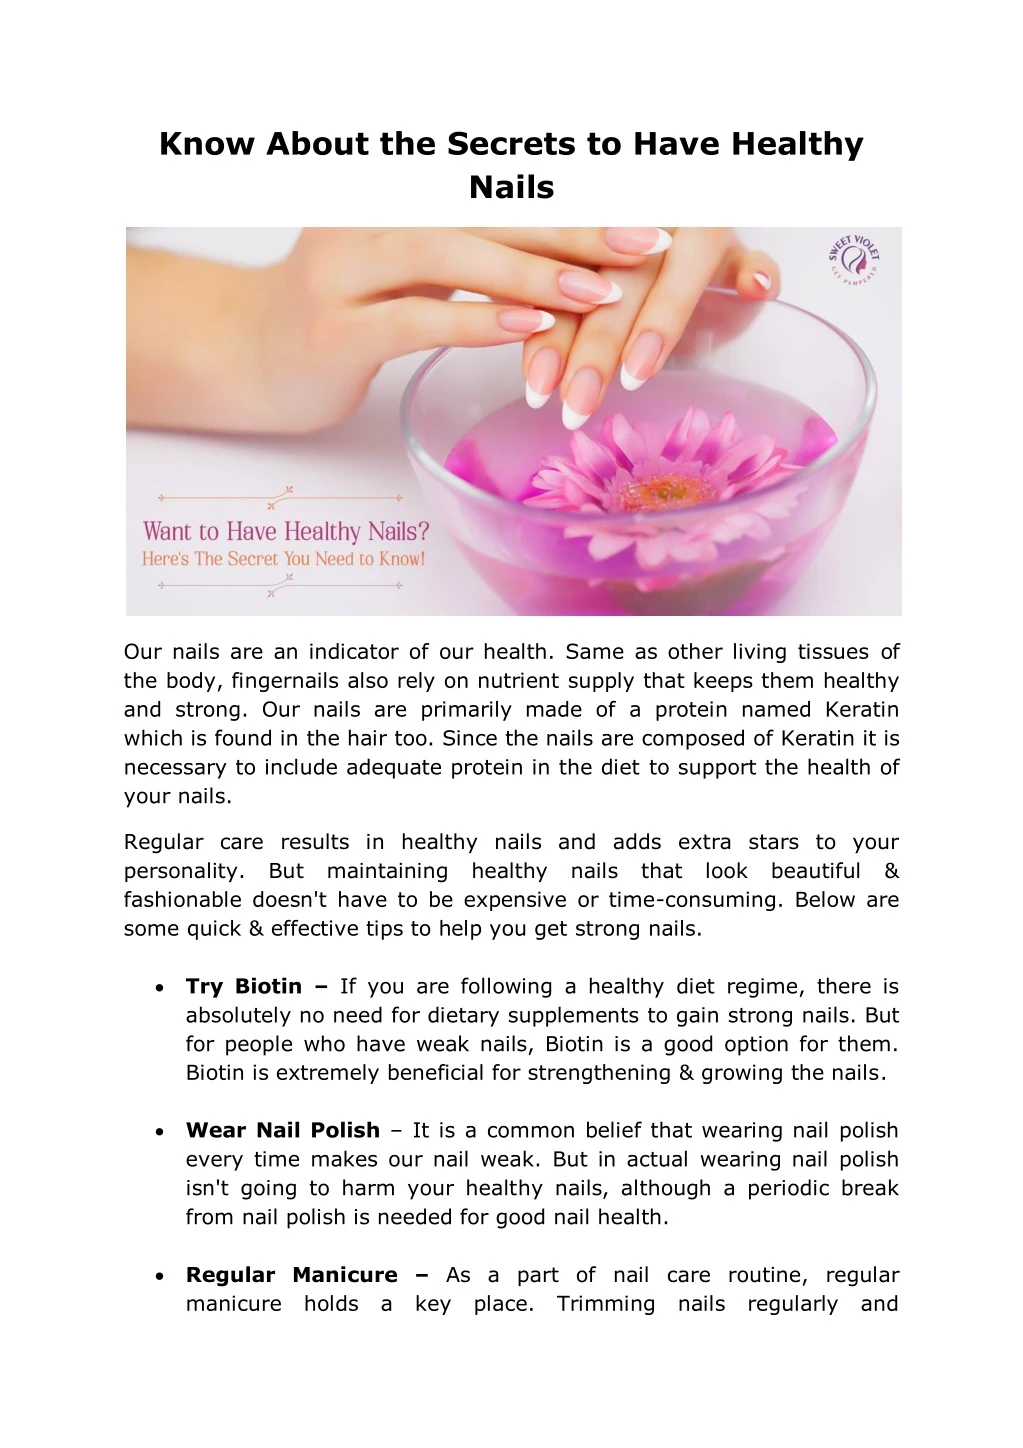 know about the secrets to have healthy nails